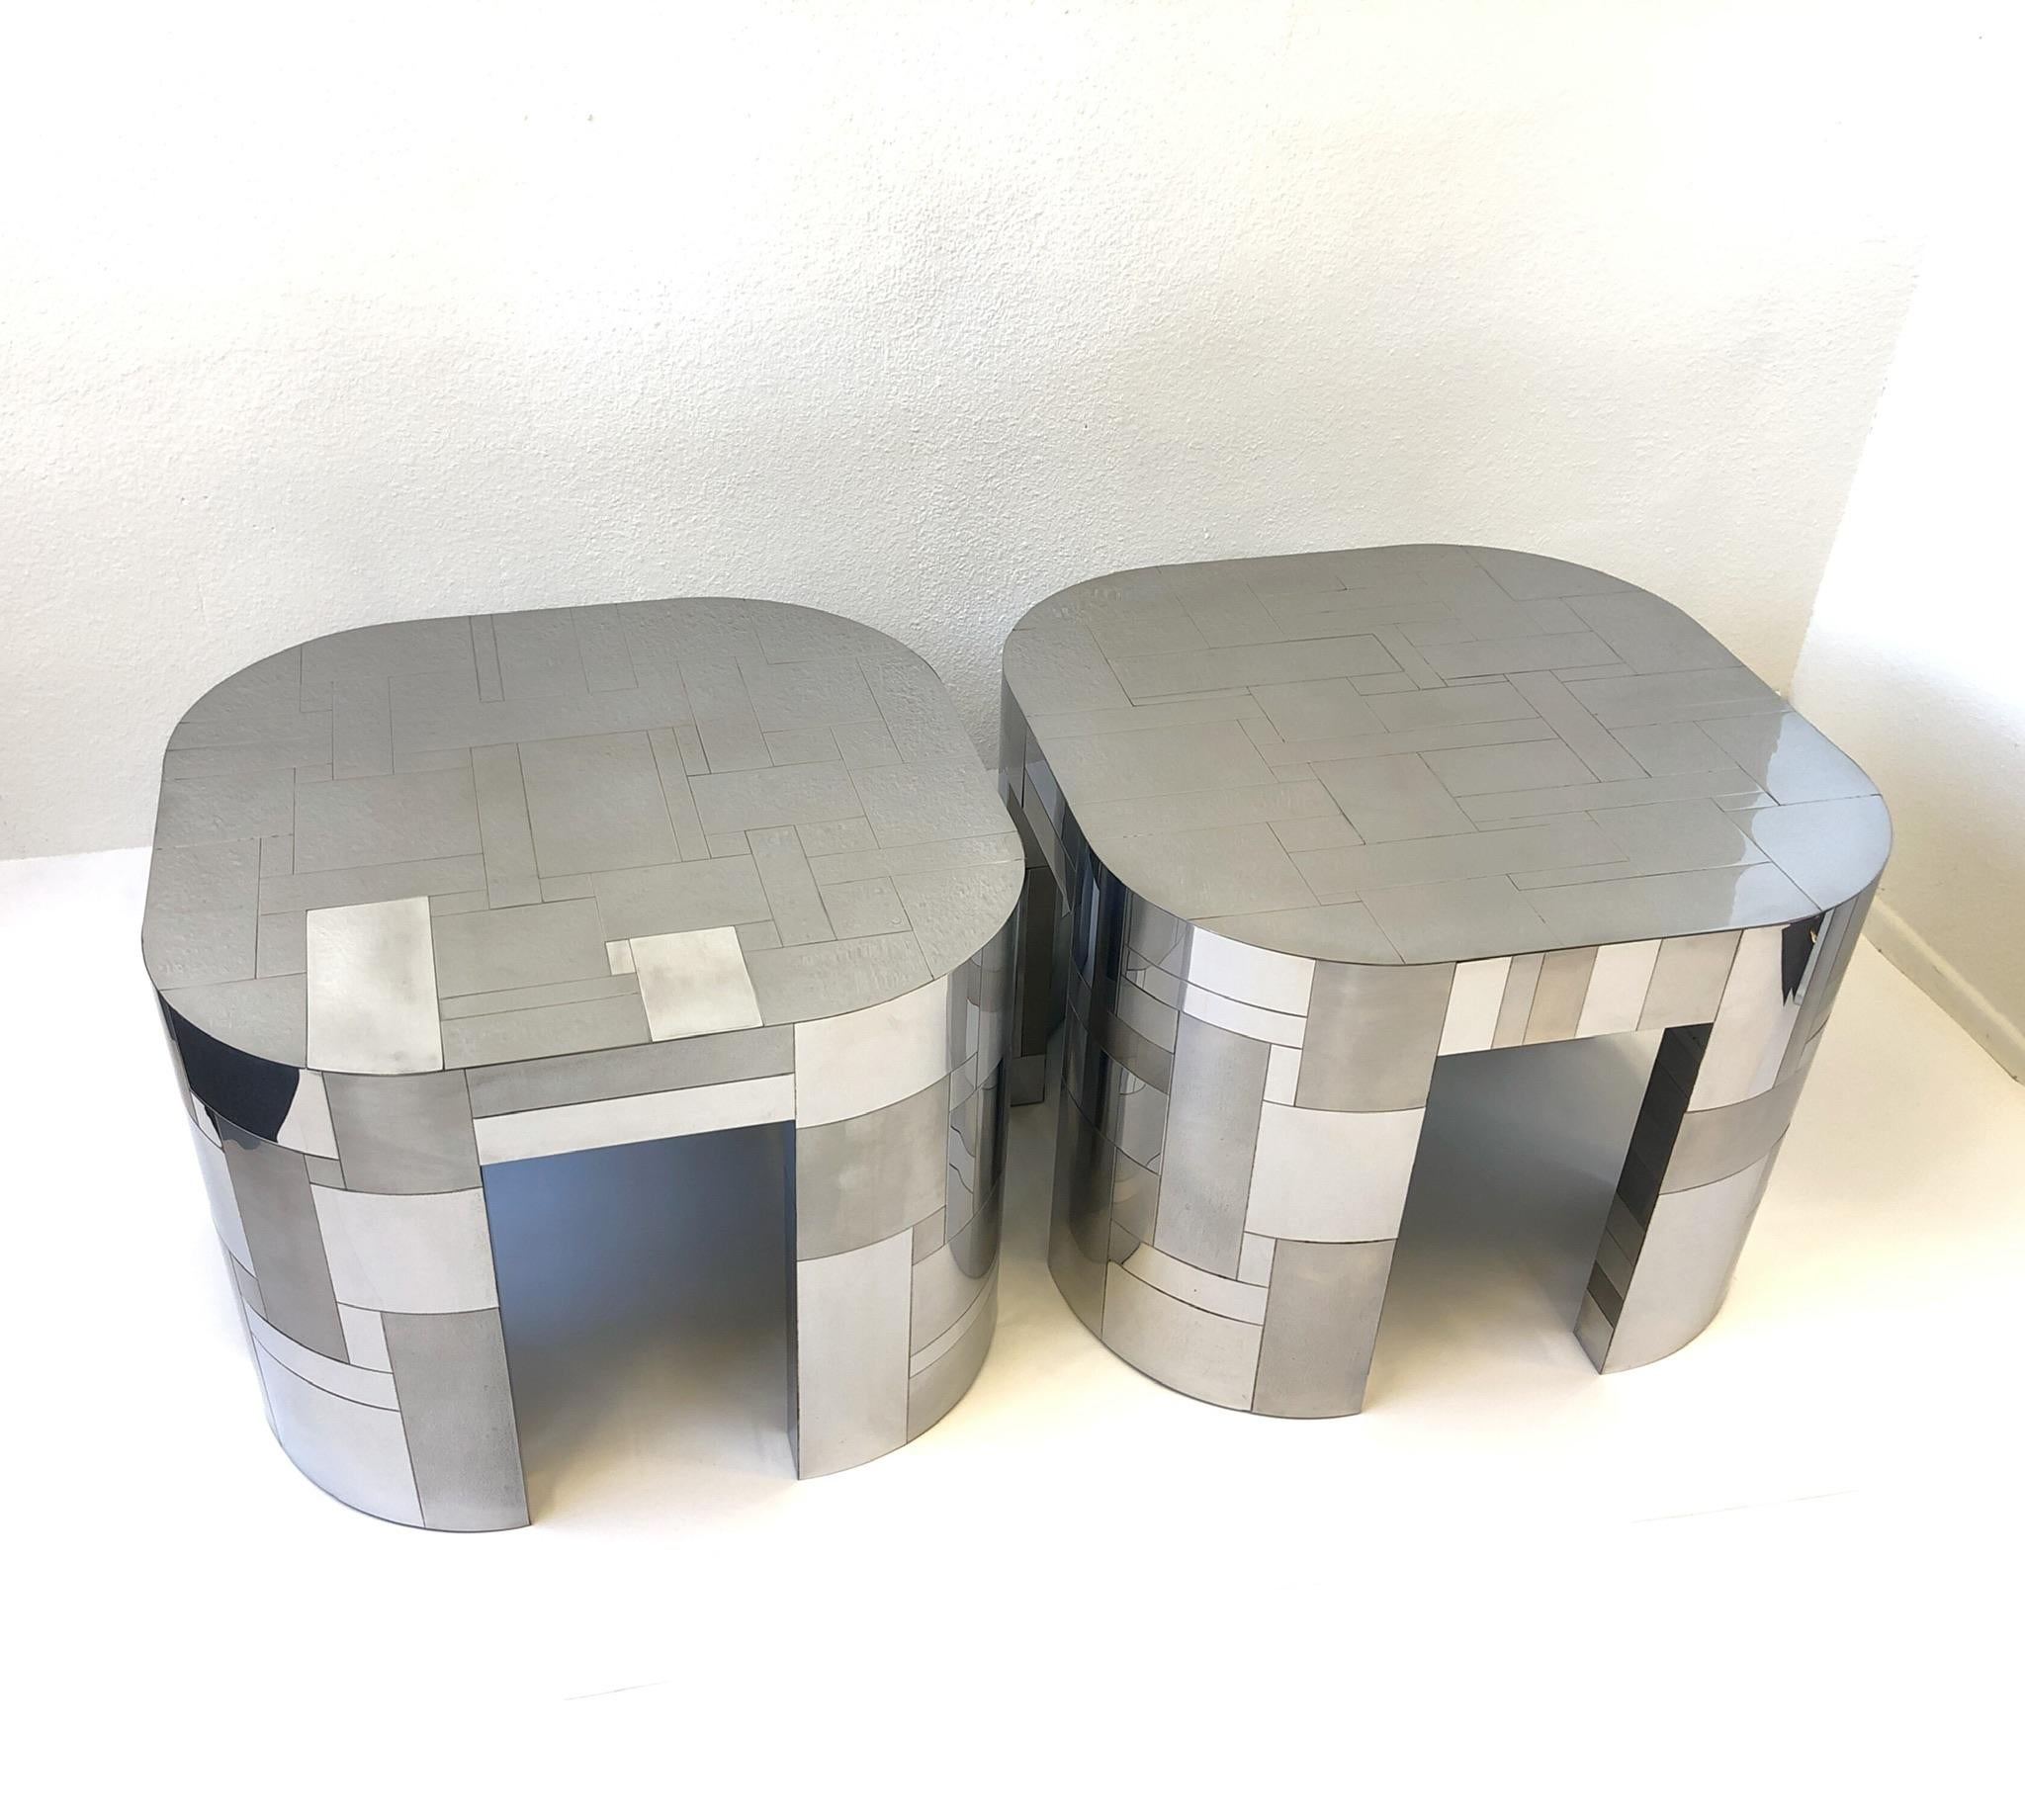 A glamorous pair of polish and satin chrome side table from the Cityscape collection design by Paul Evans in the 1970s. Both tables have the Paul Evans signature. The tables came out of British tycoon Lord James Hanson Palm Springs estate.